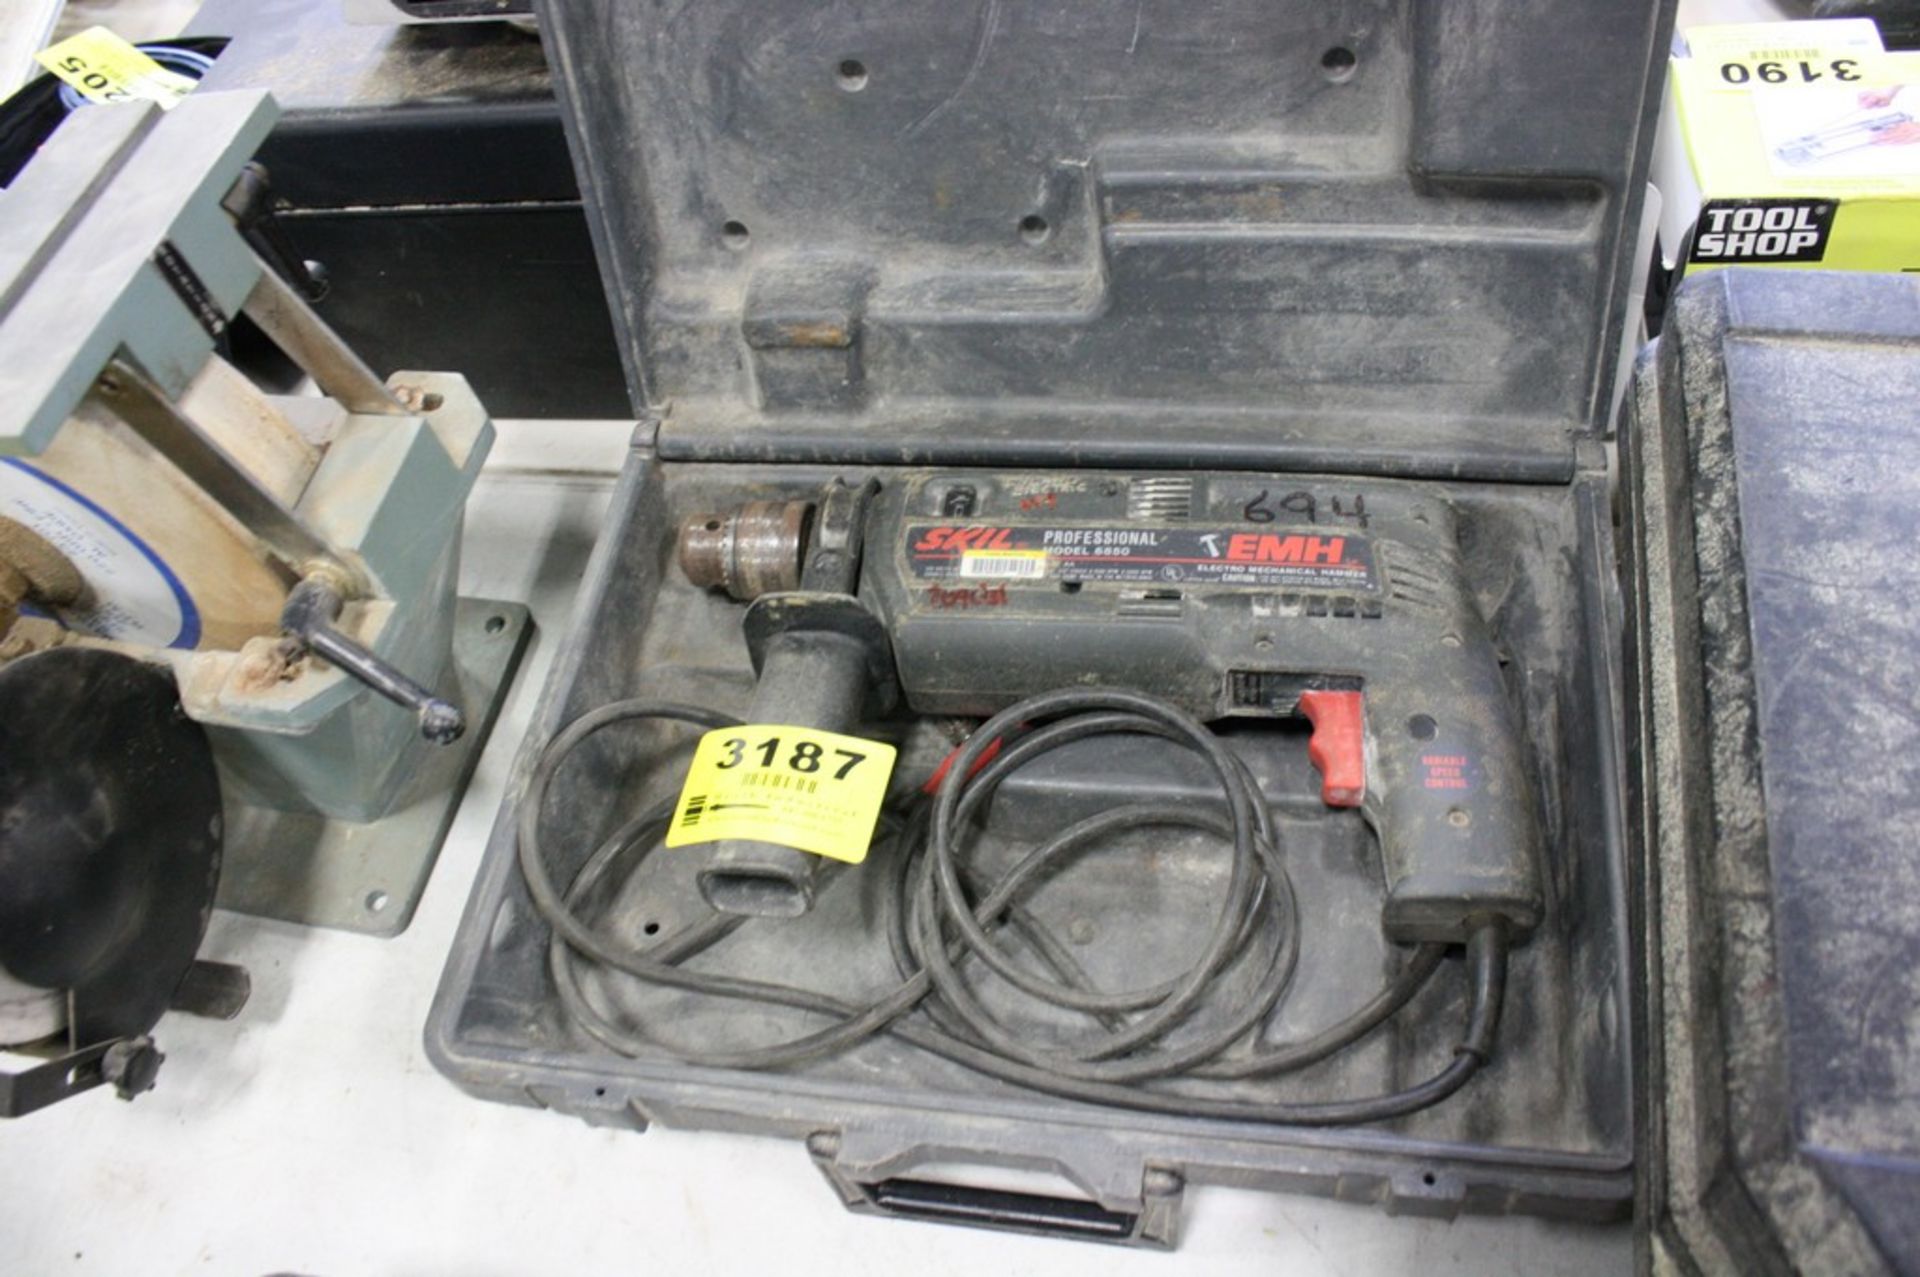 SKIL PROFESSIONAL MODEL 6850 ELECTRO MECHANICAL HAMMER DRILL